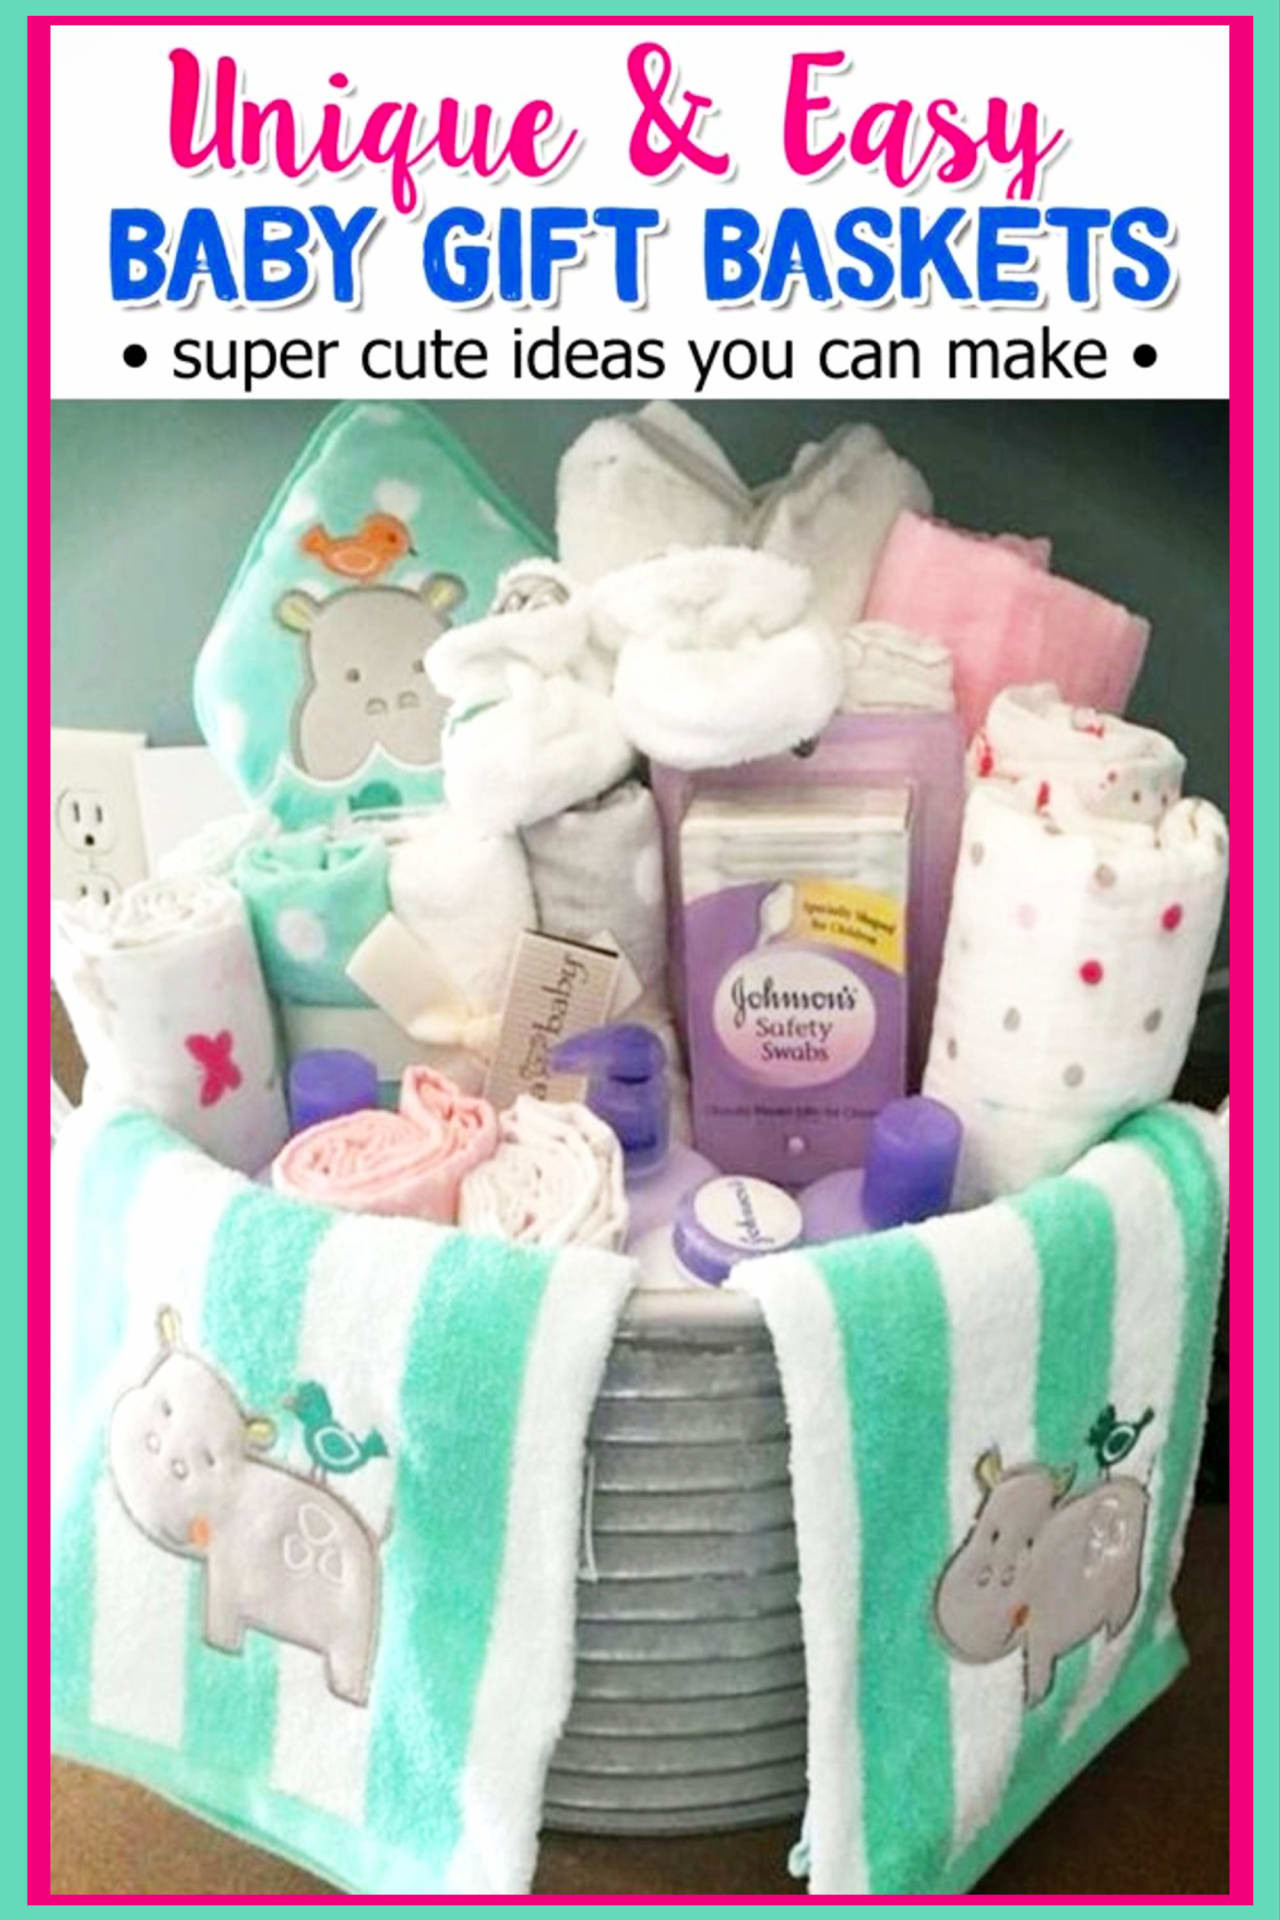 Personalized Baby Gifts Cheap
 28 Affordable & Cheap Baby Shower Gift Ideas For Those on